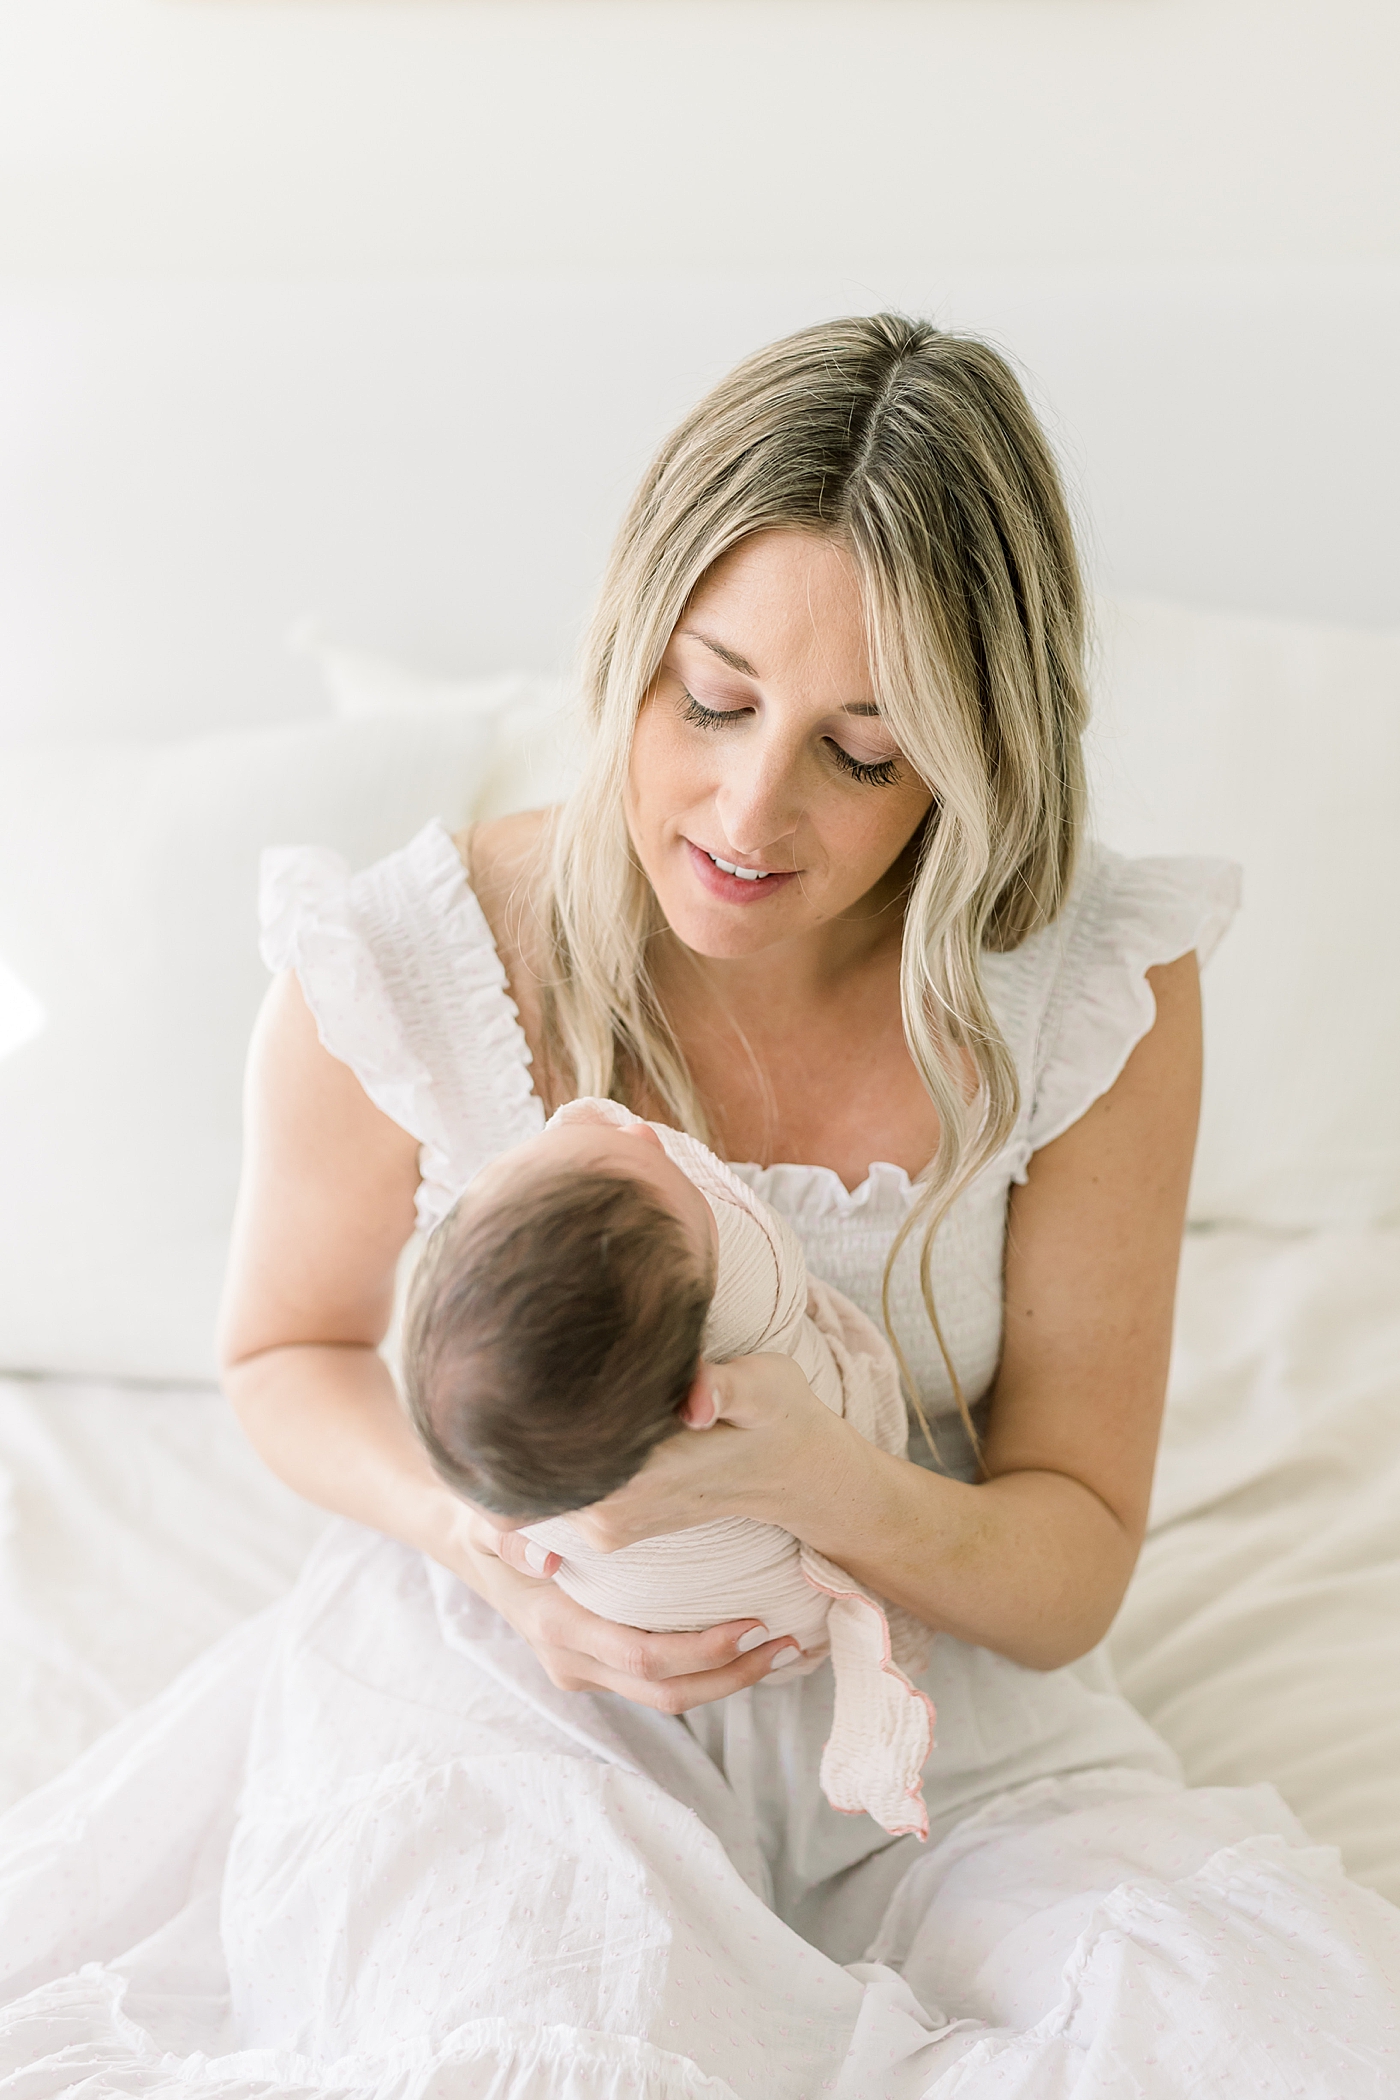 Detail of mom in white dress holding her newborn baby girl | Image by Caitlyn Motycka